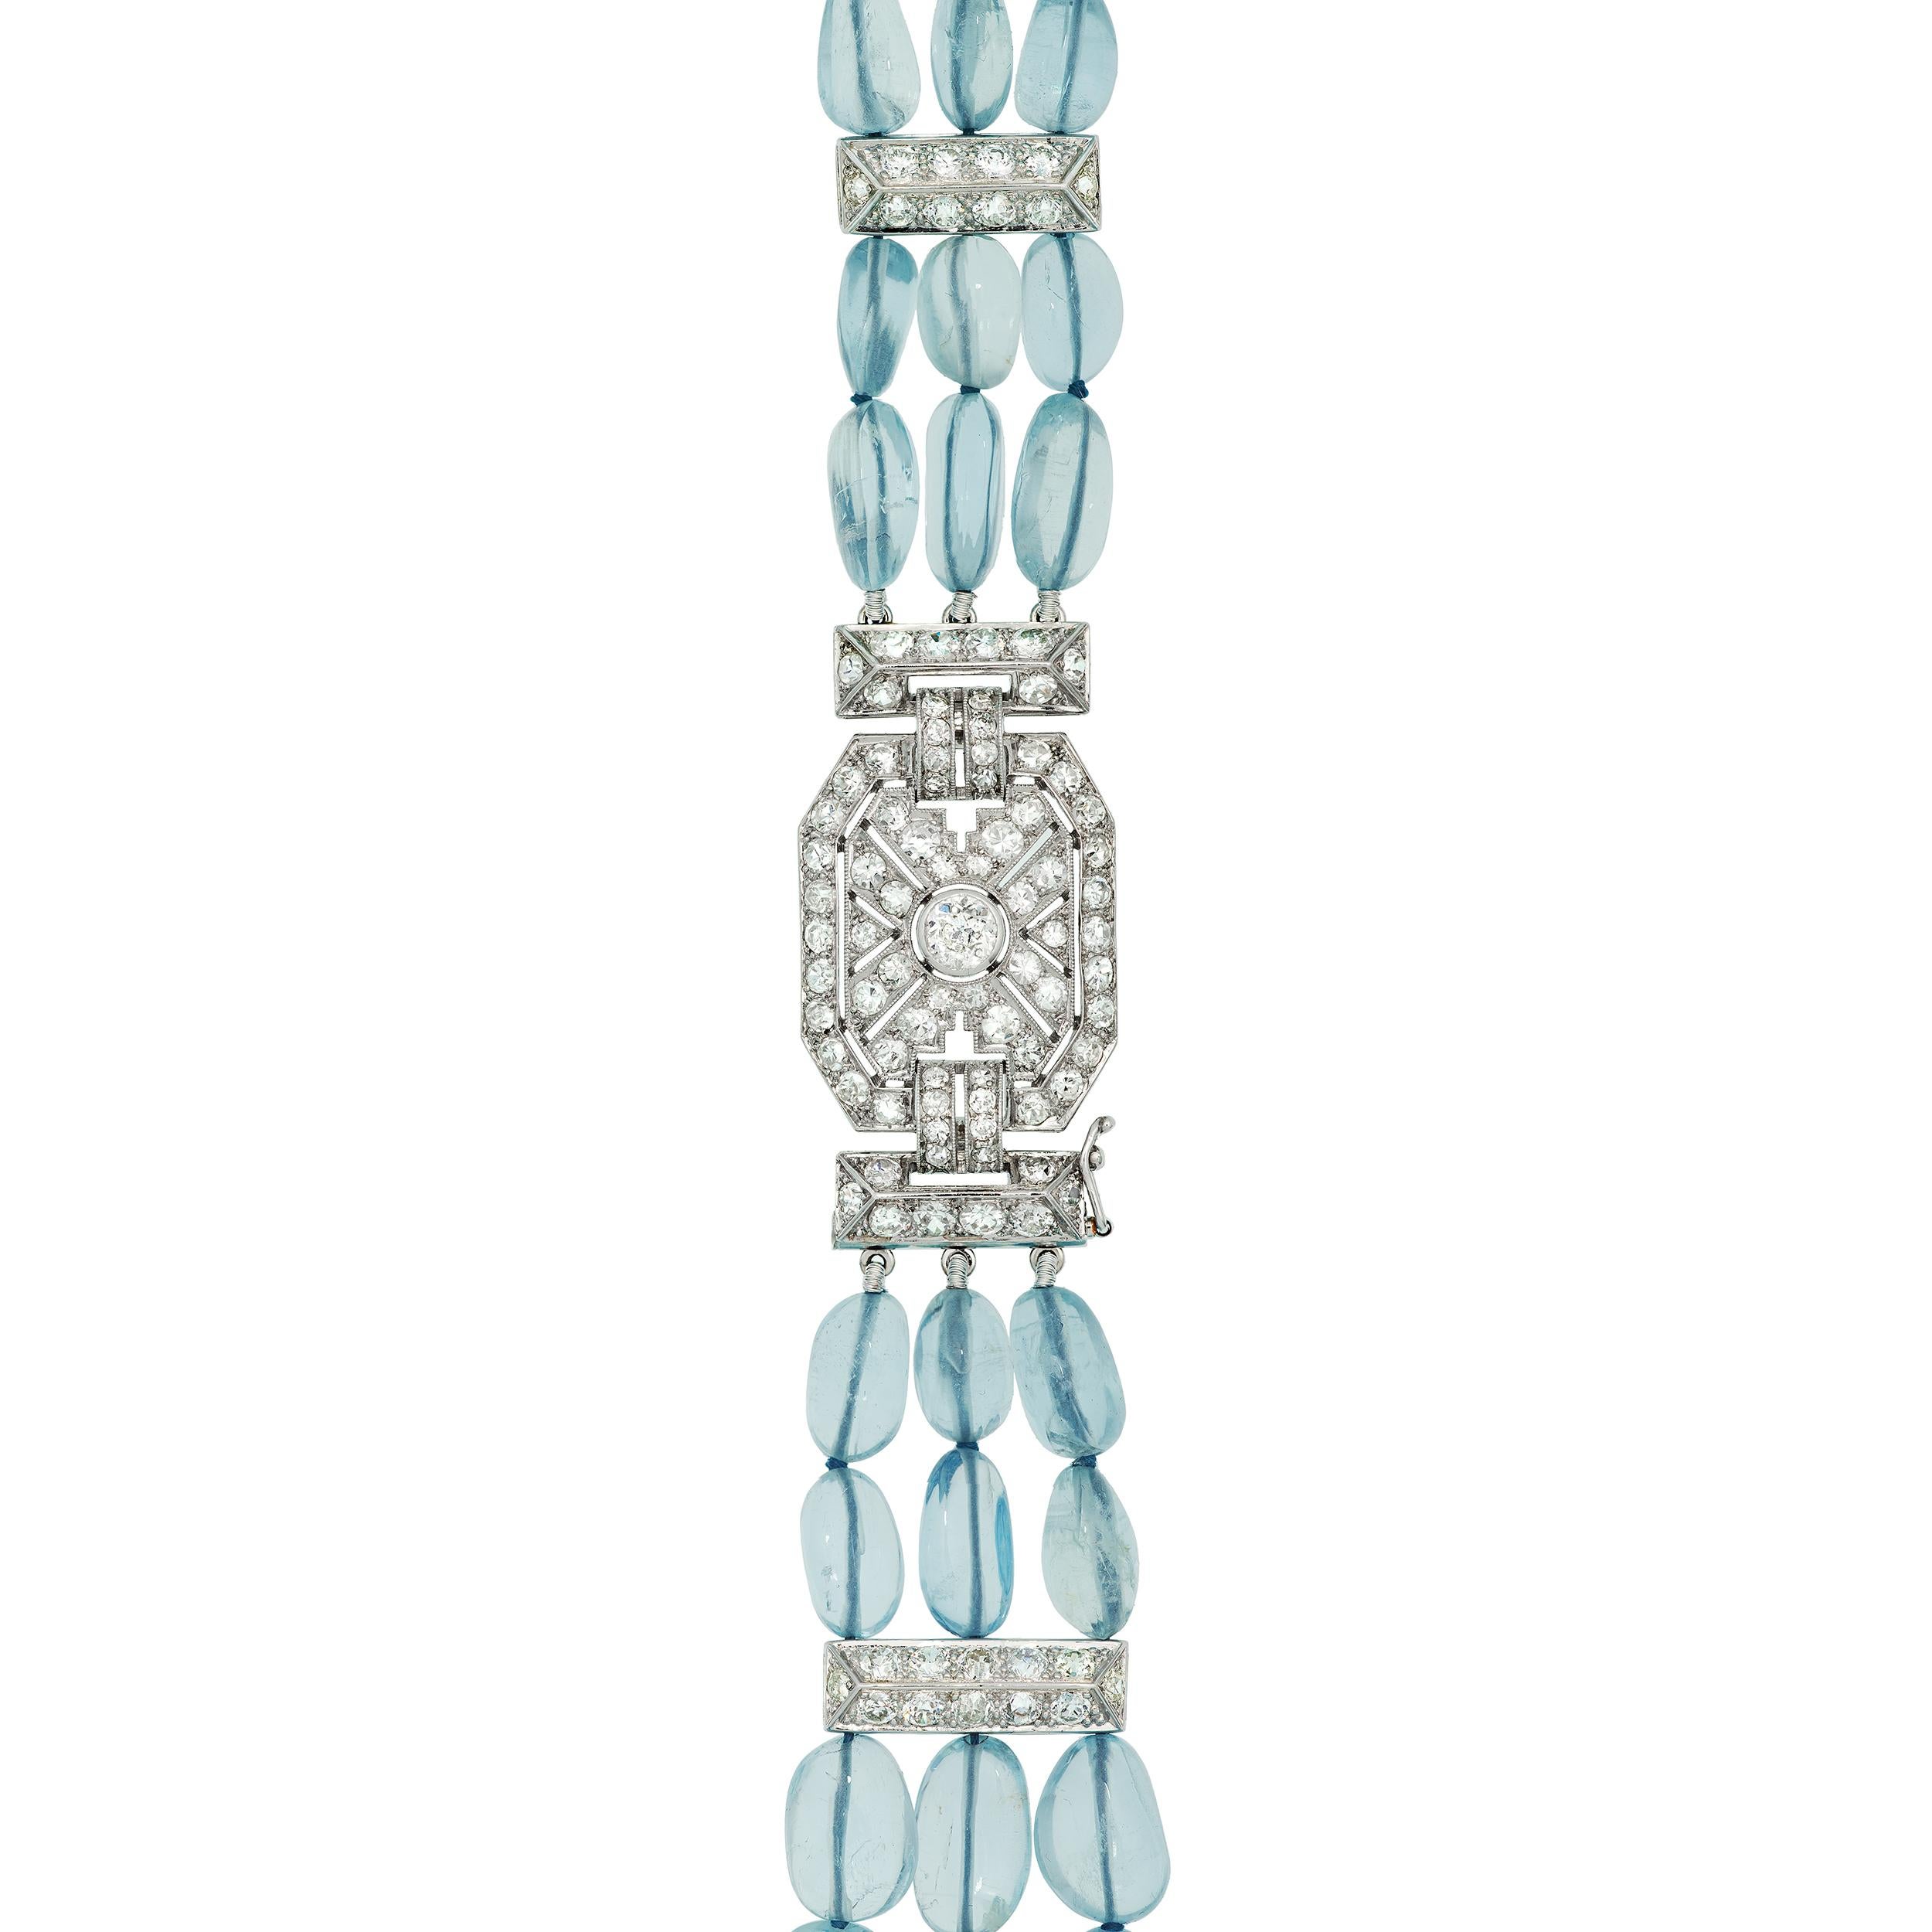 This triple-strand necklace boasts 164 smooth oval Aquamarine weighing 509.35 Carats all hand knotted to lay perfectly.  While the necklace carries substance, the smooth oval gemstones lend an organic and soft feel that allows this necklace to be